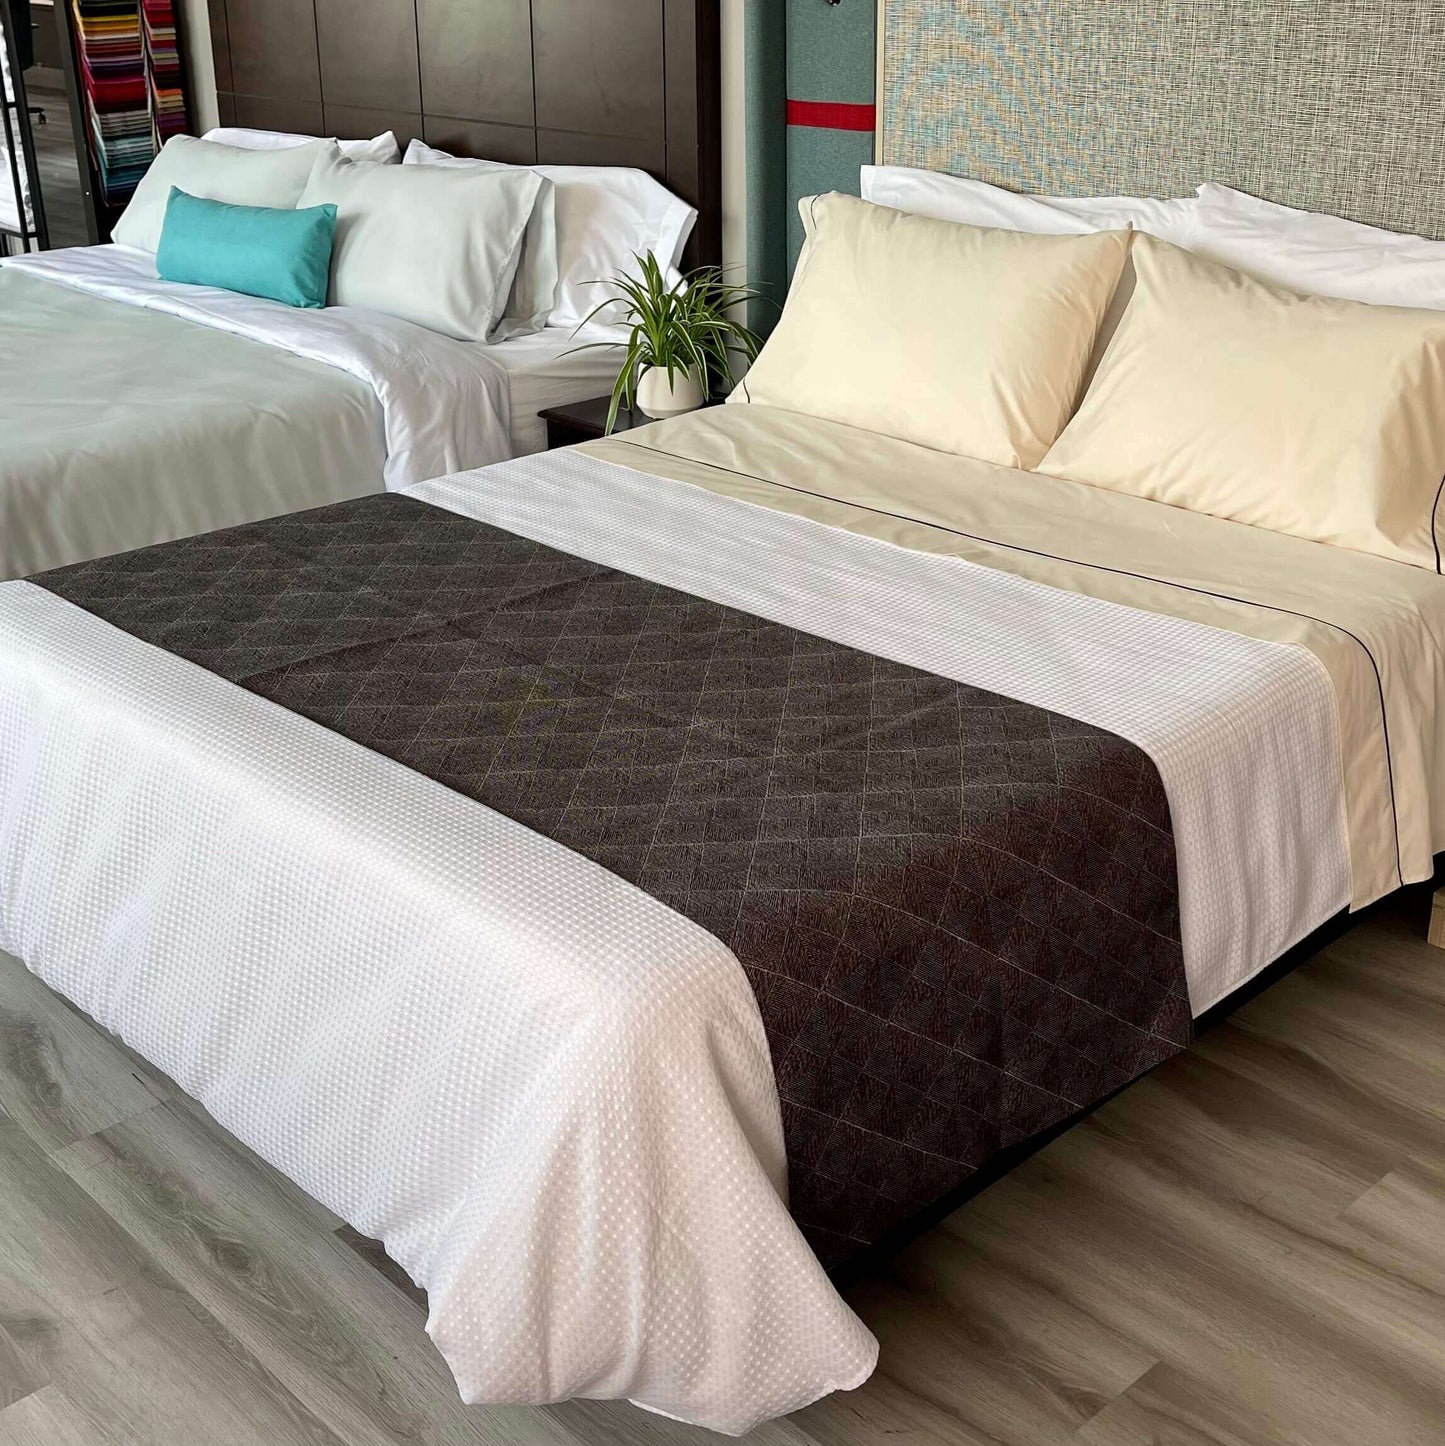 There are two beds next to each other with white bed sheets and decorative pillows near the headboards. The bed that is in close proximity has a bed scarf/ runner in a deep brown colour with white detailing throughout the fabric. 